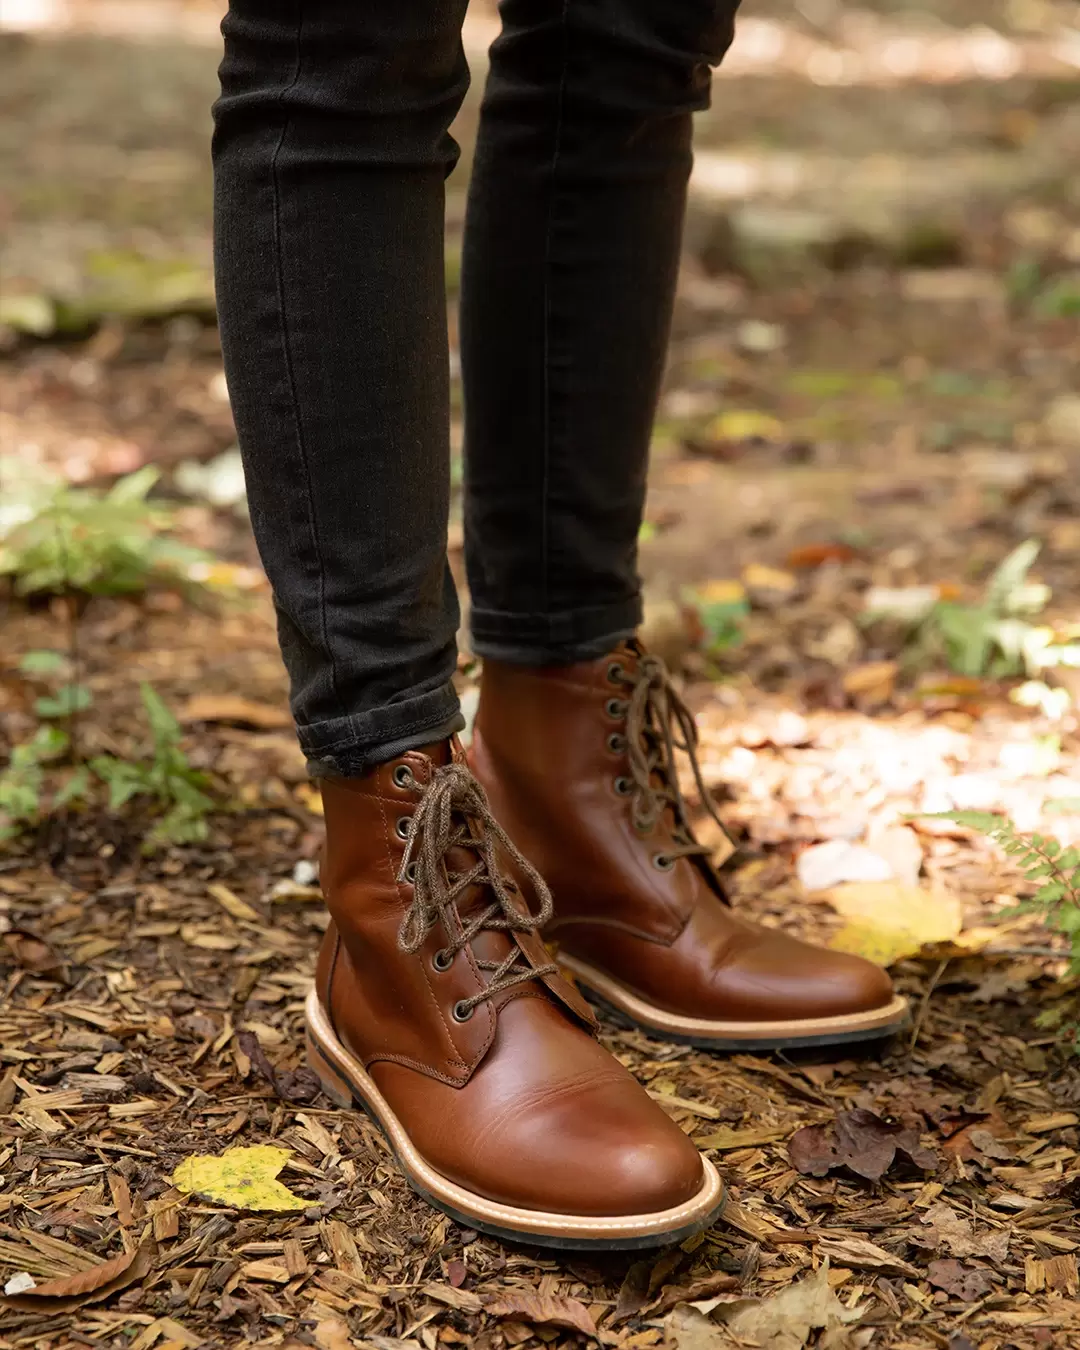 Amalia All Weather Boot Review - Nisolo Ethically Made Shoes & Accessories